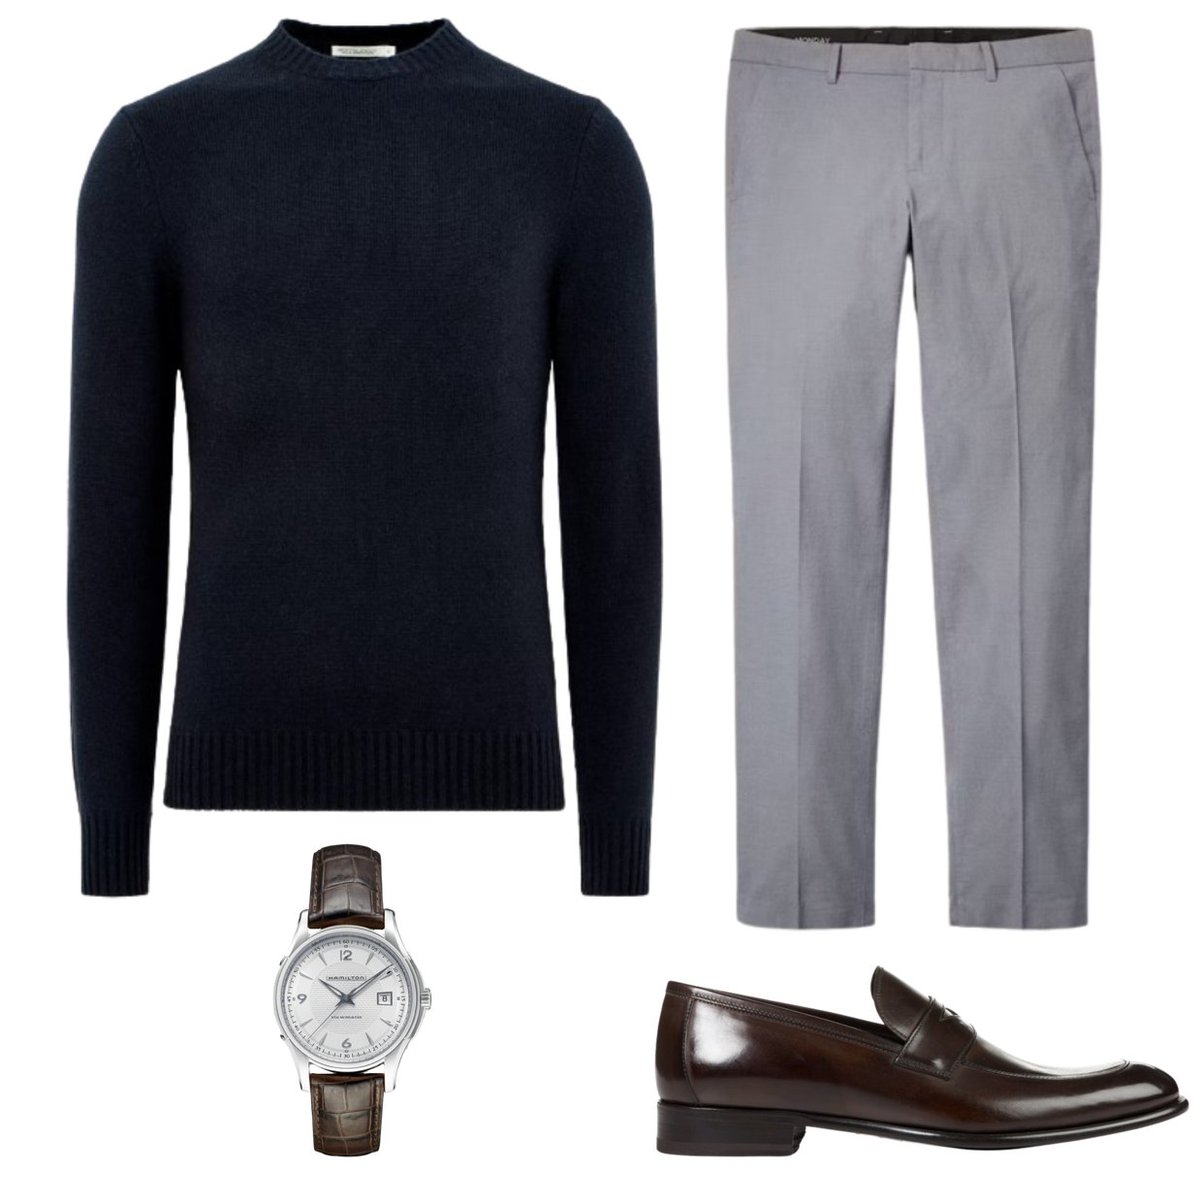 Stretch Weekday Warrior Dress Pants in Monday blue basketweave from Bonobos (affiliate link): bit.ly/3OBzk7N

That subtle basketweave texture.👌

These trousers may look solid from a distance but once up close you'll notice the pattern/texture. Great for a business